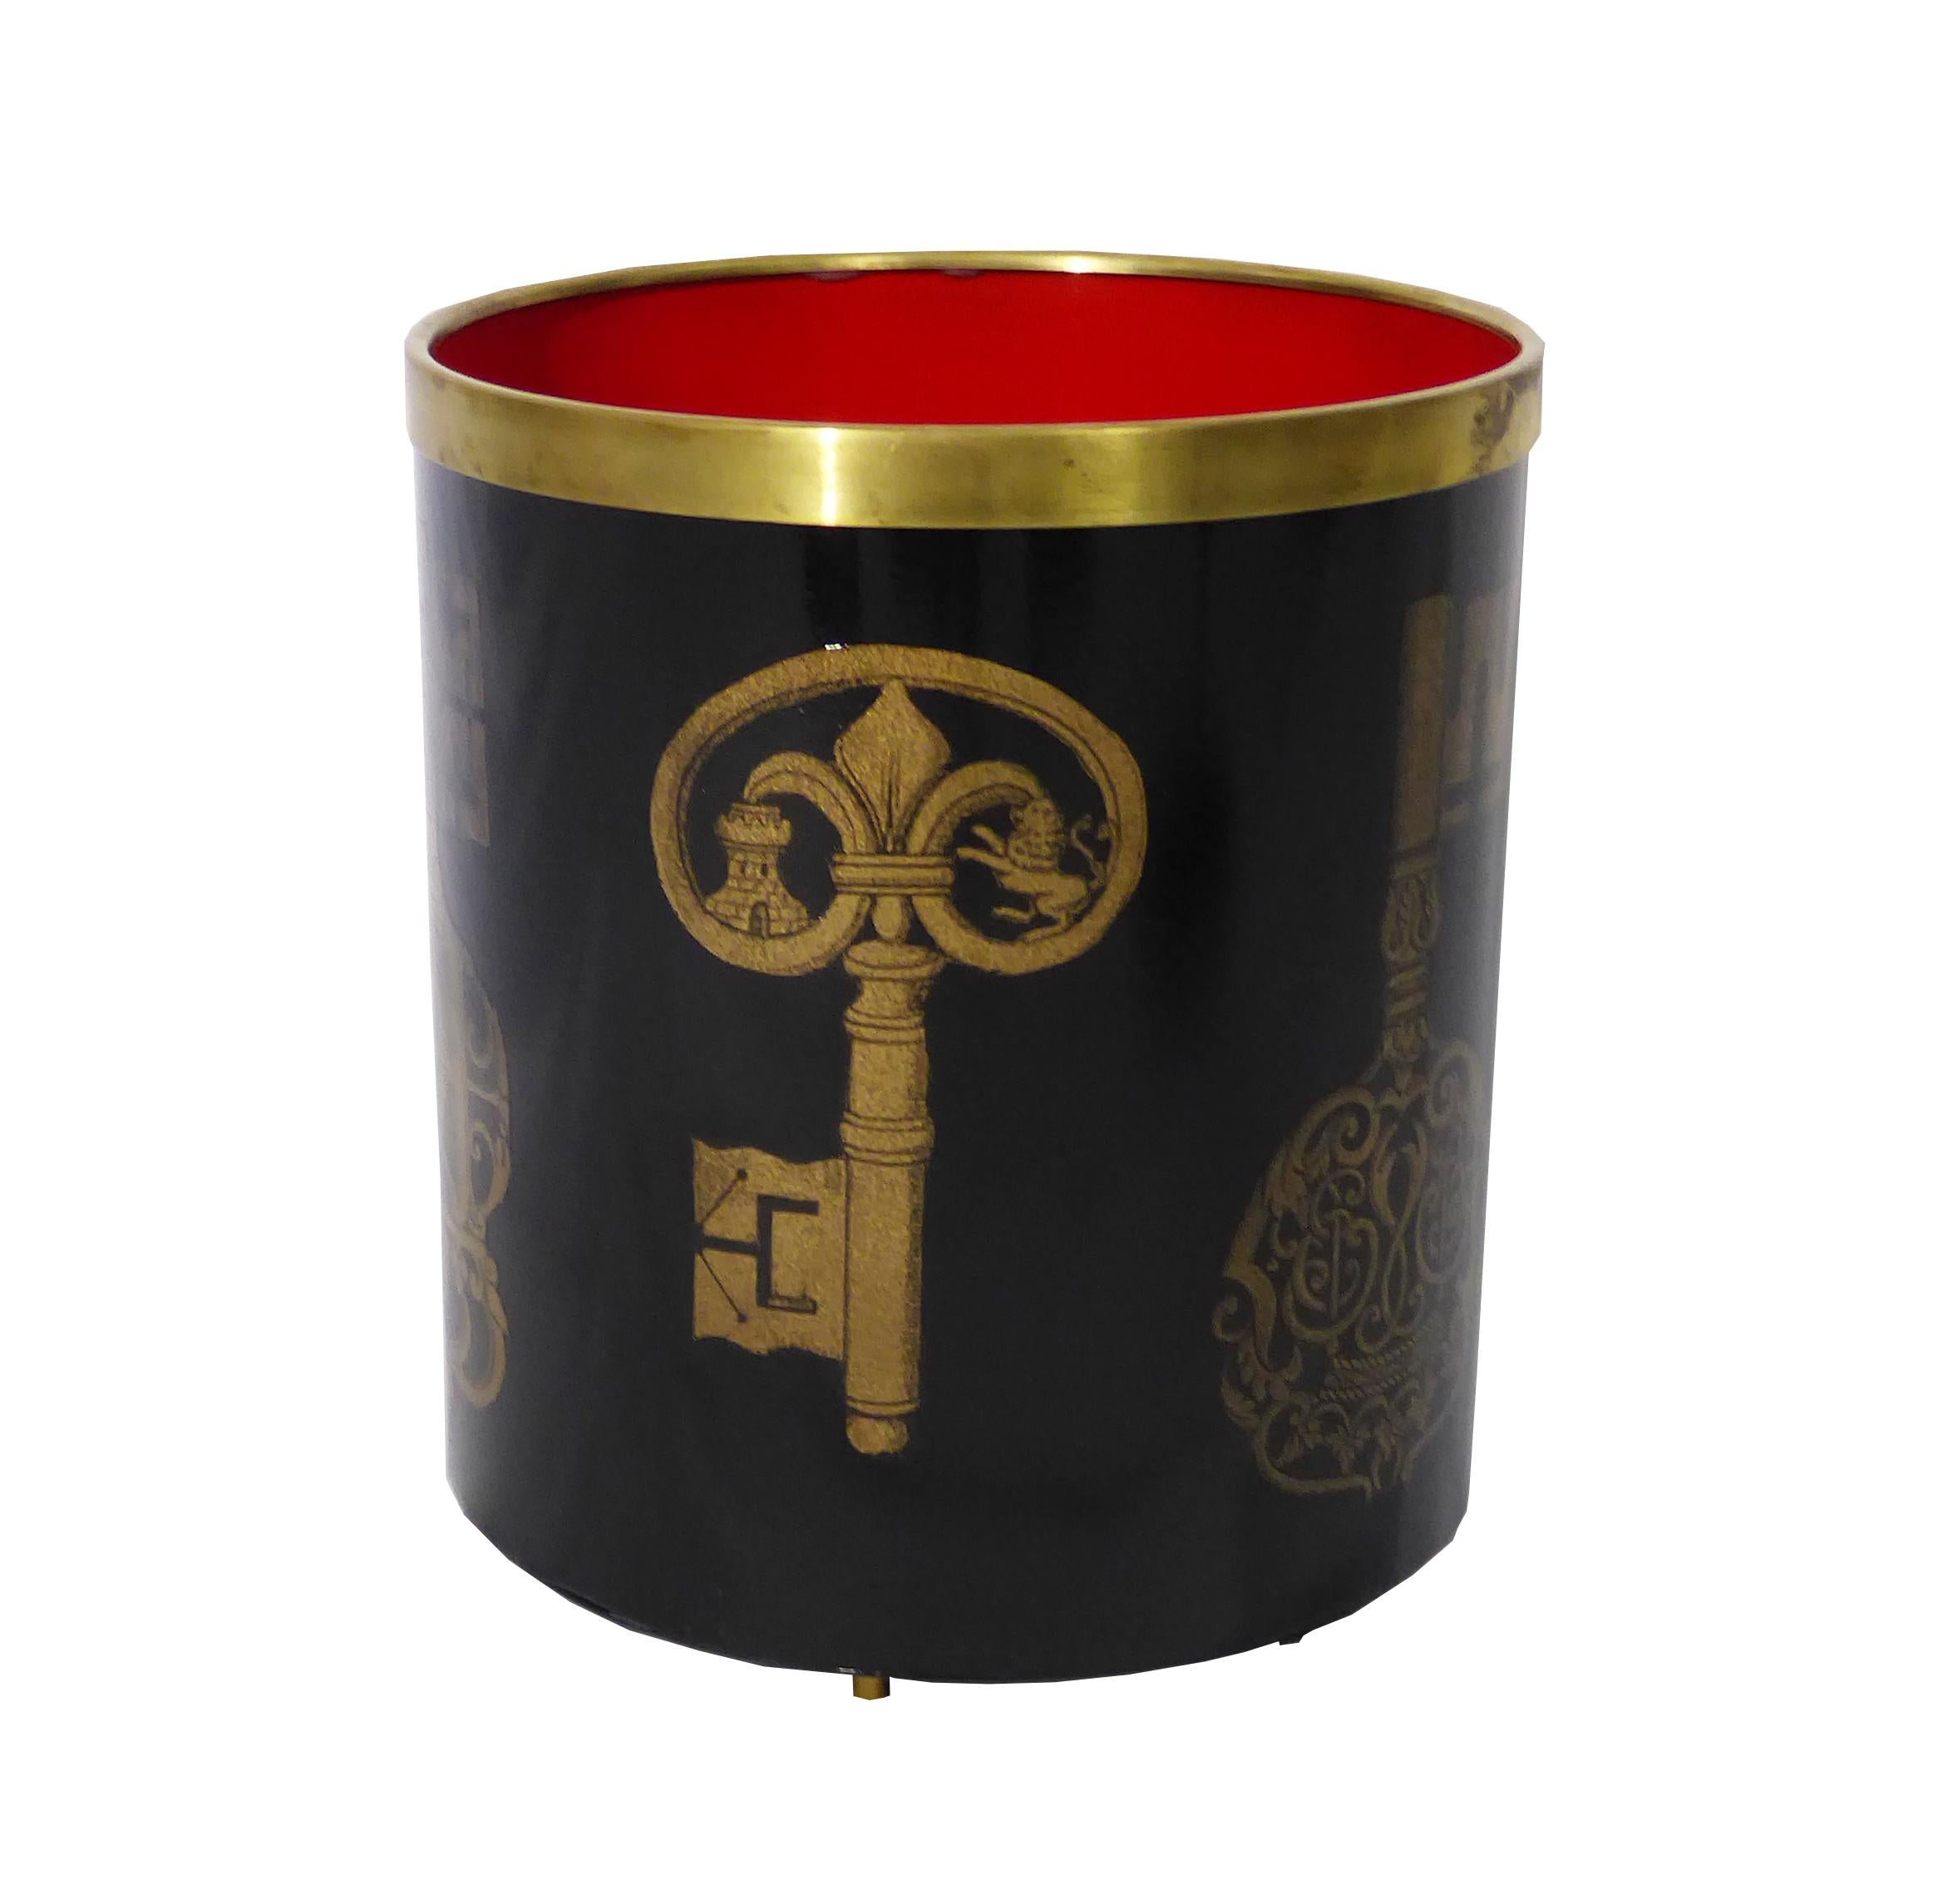 Elegant Fornasetti Italian modernist waste basket. It has an ebonized finish with stencilled key design. Brass trim and feet, lush red color interior. Marked Fornasetti Milano, Italy. Lithographed on metal.